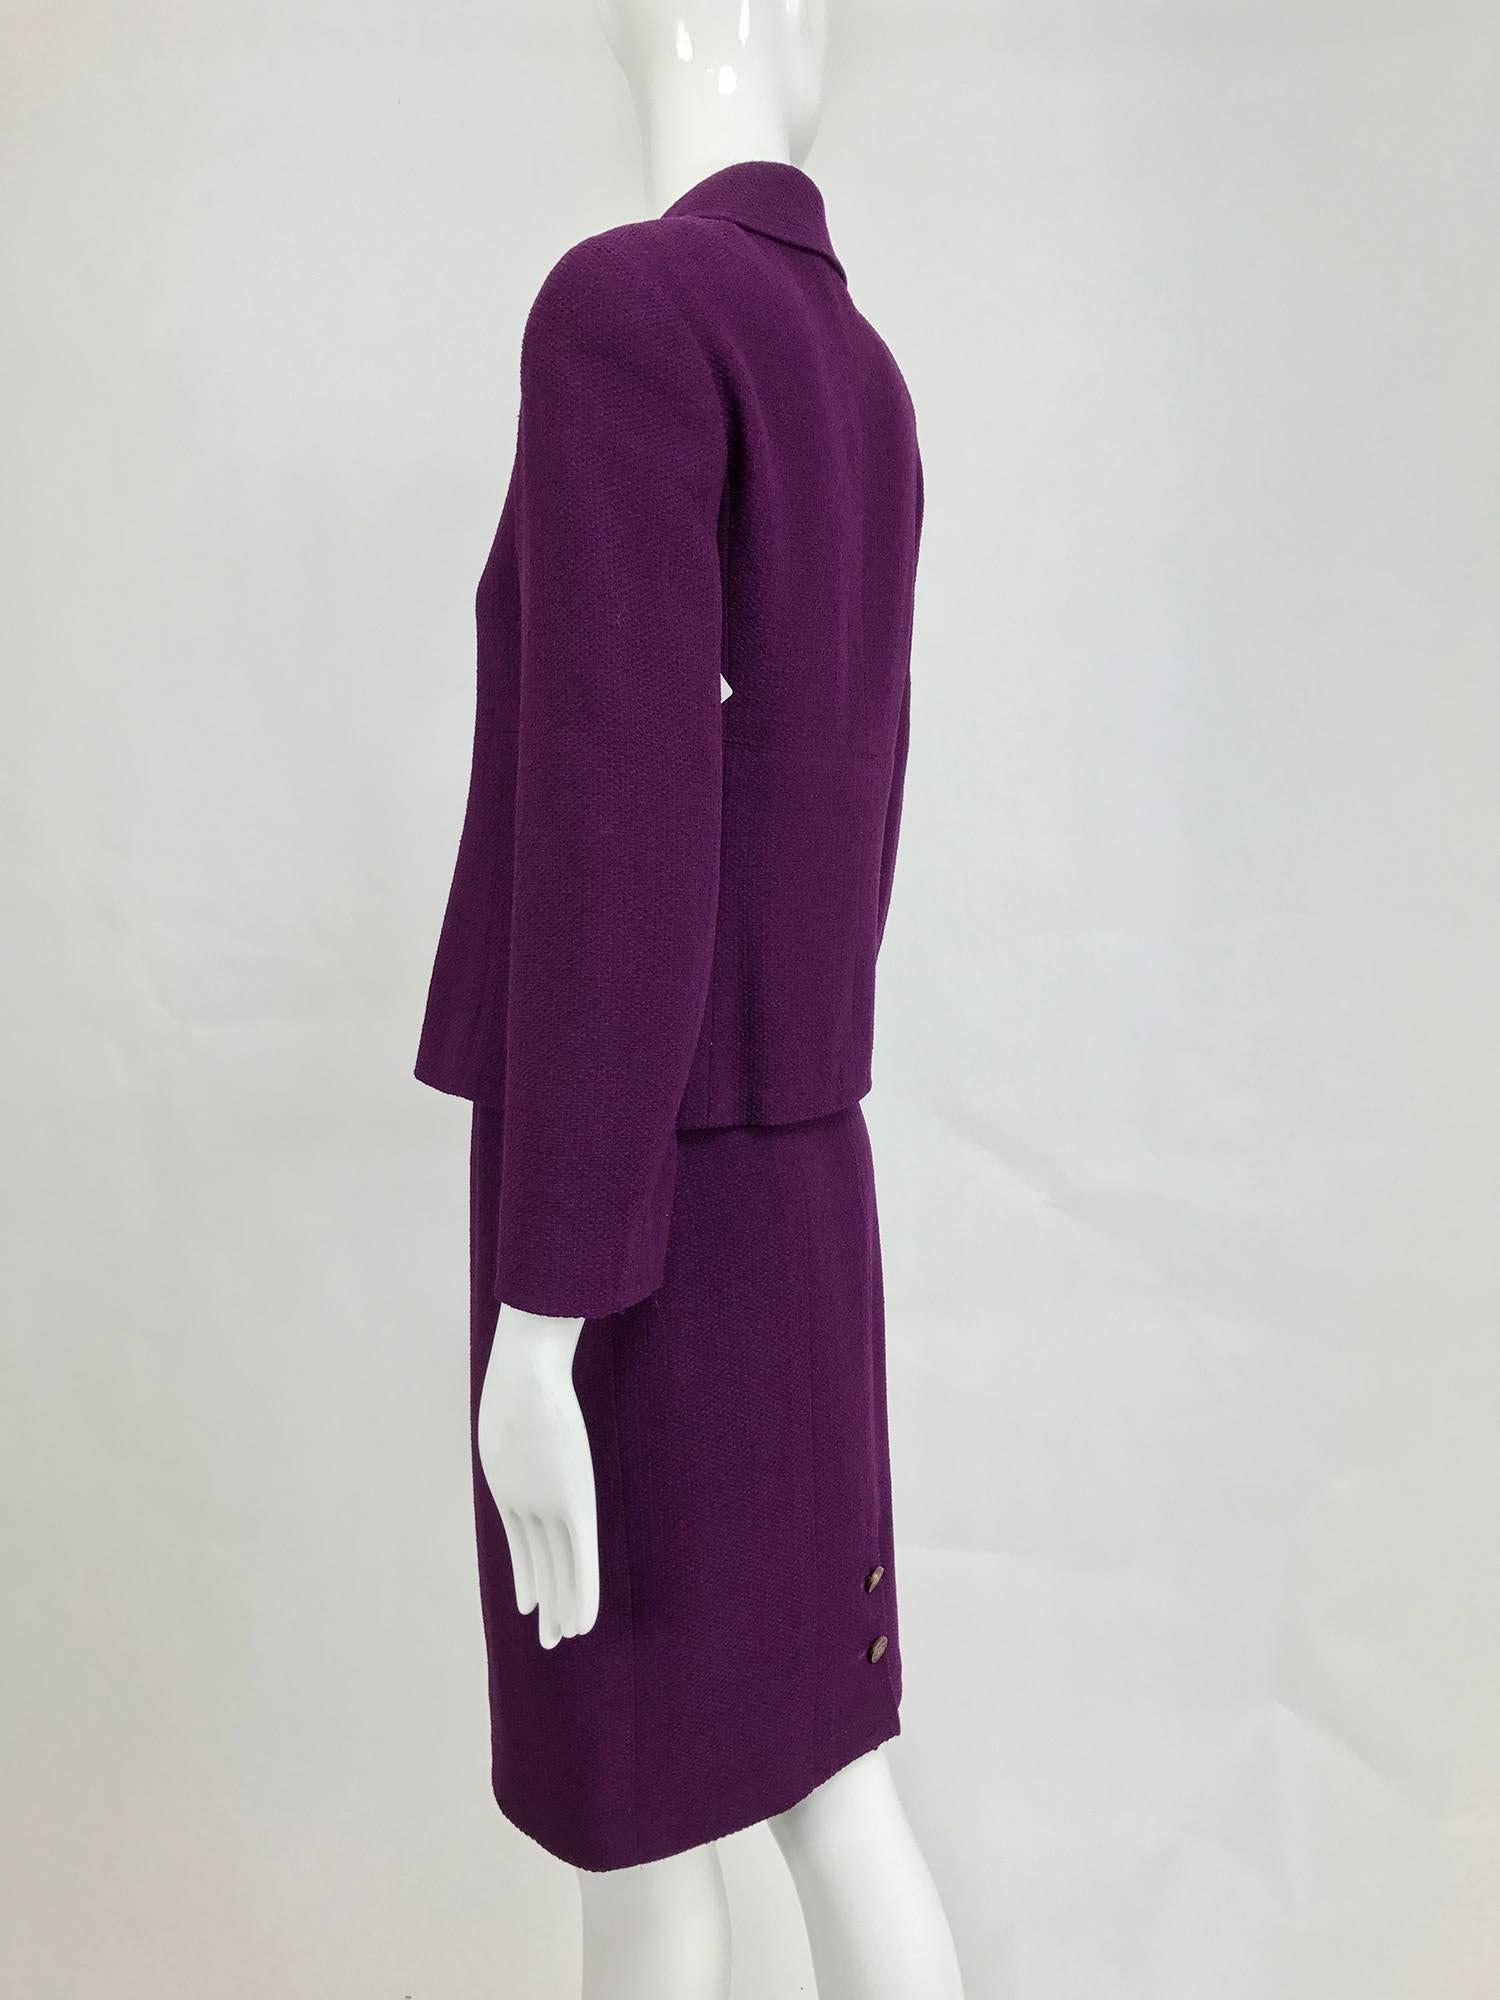 Chanel aubergine boucle classic double breasted skirt suit 1998A In Excellent Condition For Sale In West Palm Beach, FL